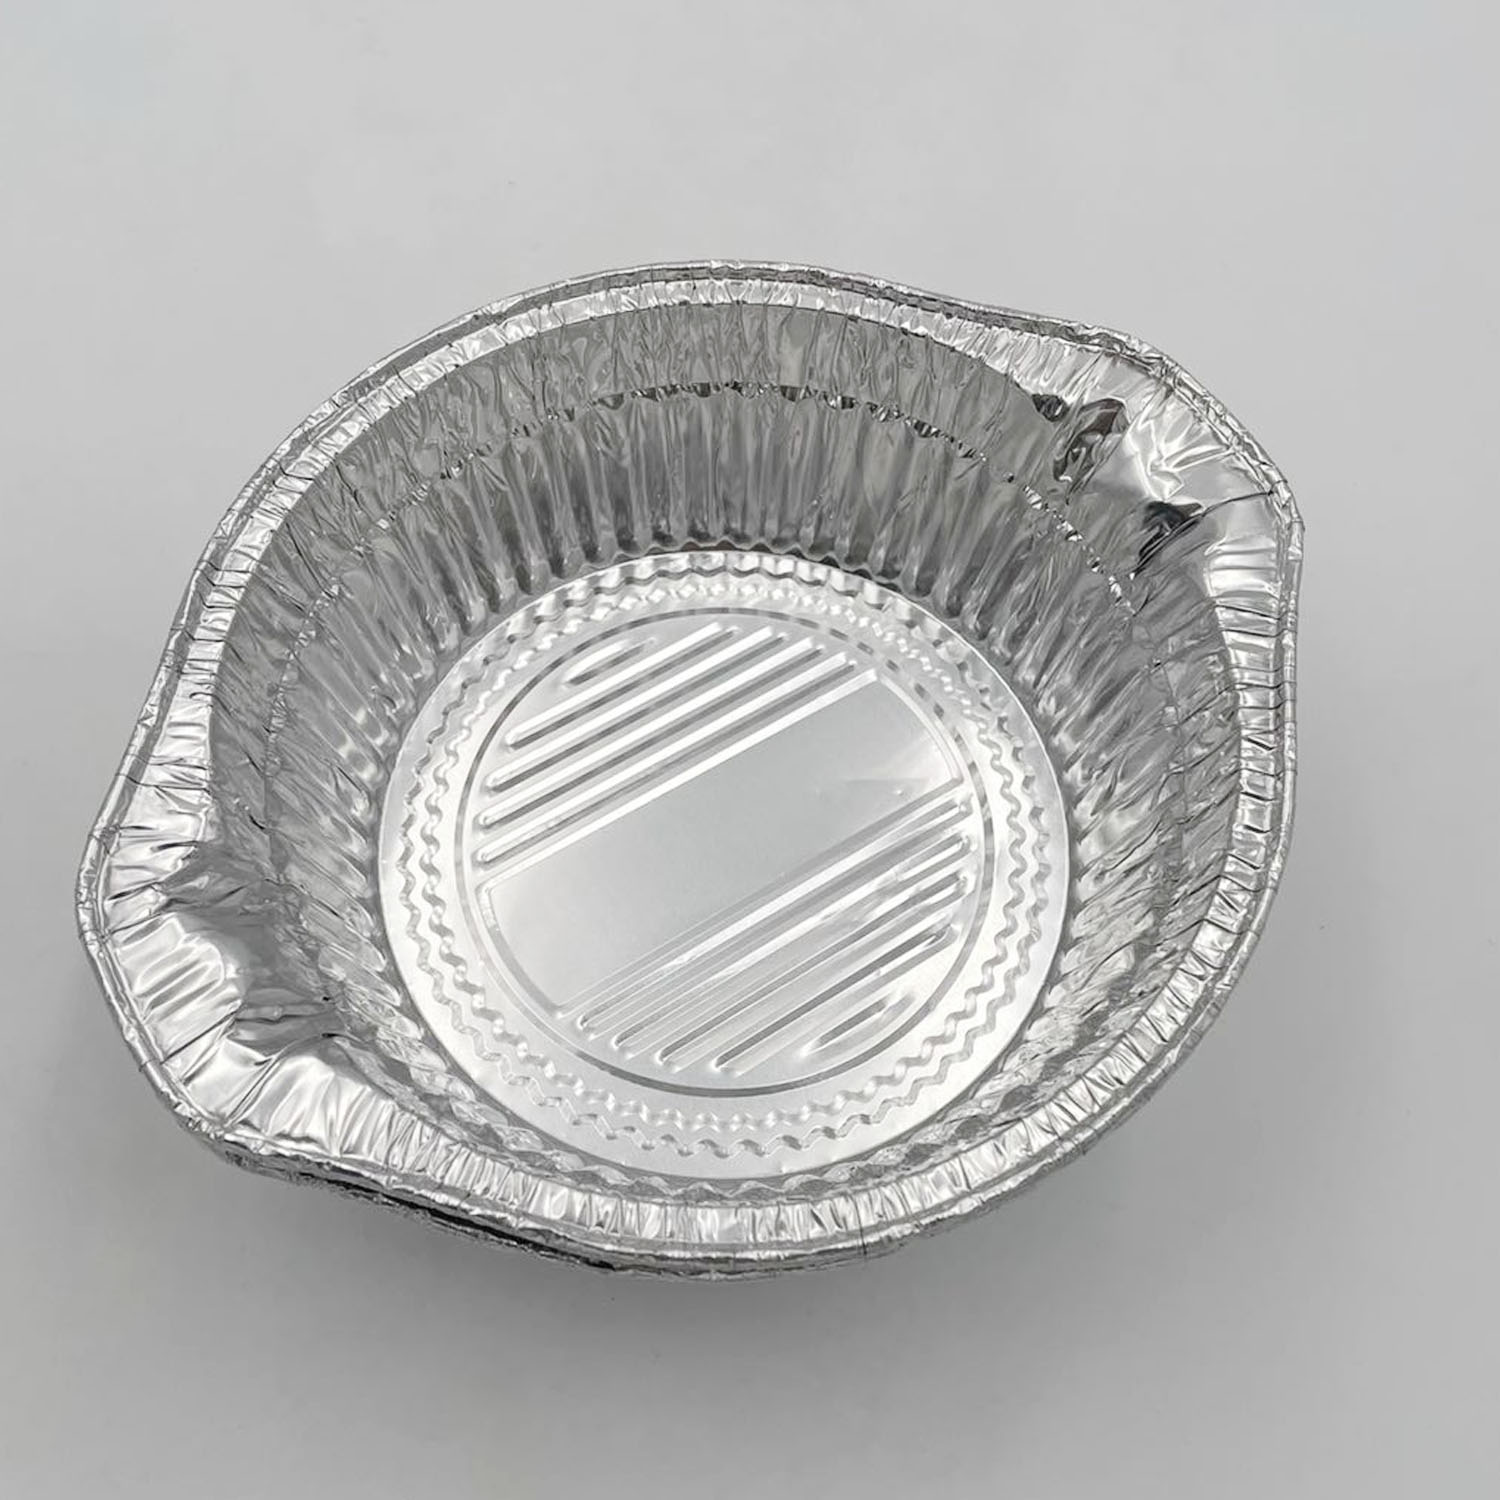 1000ml Aluminum Foil Food Packing Take-Away Container Trays, Pie Cake Mold,  BBQ Grilling Packaging Pan, Baking Cooking Tools 6 - China Foil Baking Pan  and Alimonum Foil Pan price | Made-in-China.com